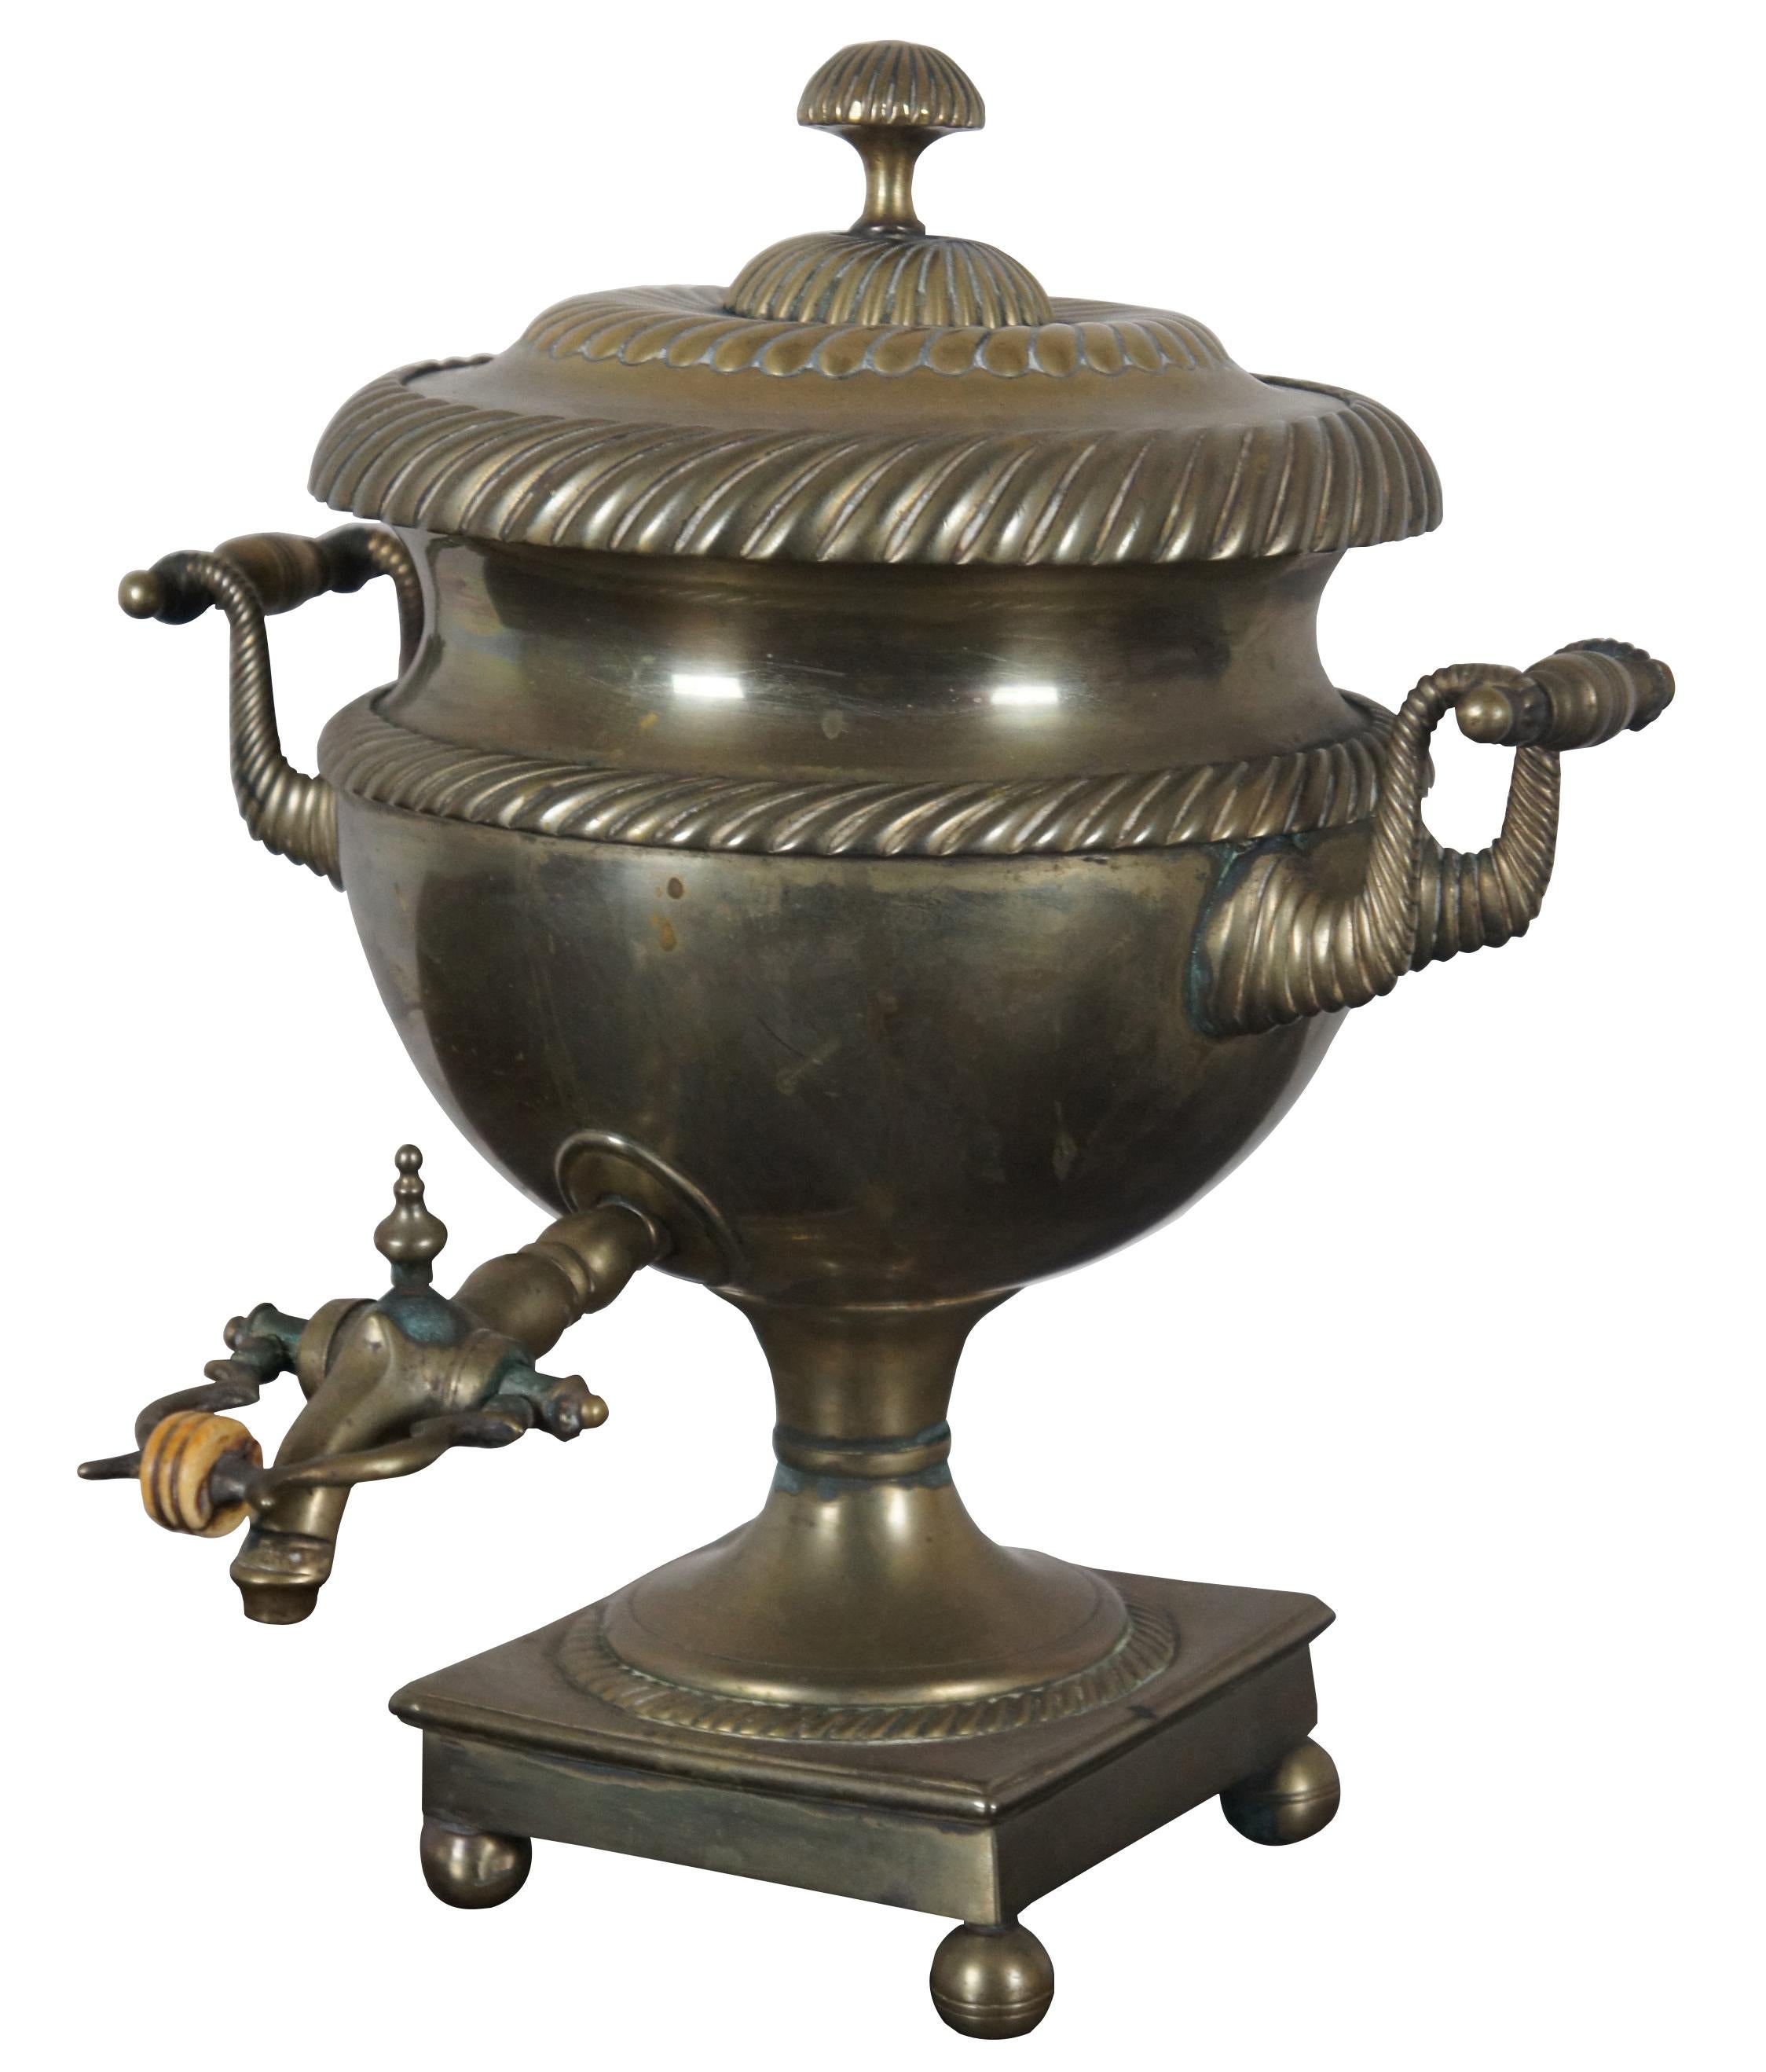 Antique brass samovar shaped like a neoclassical urn. Regency era, circa 1800s. Features ornate gadrooning and turned handles.
     